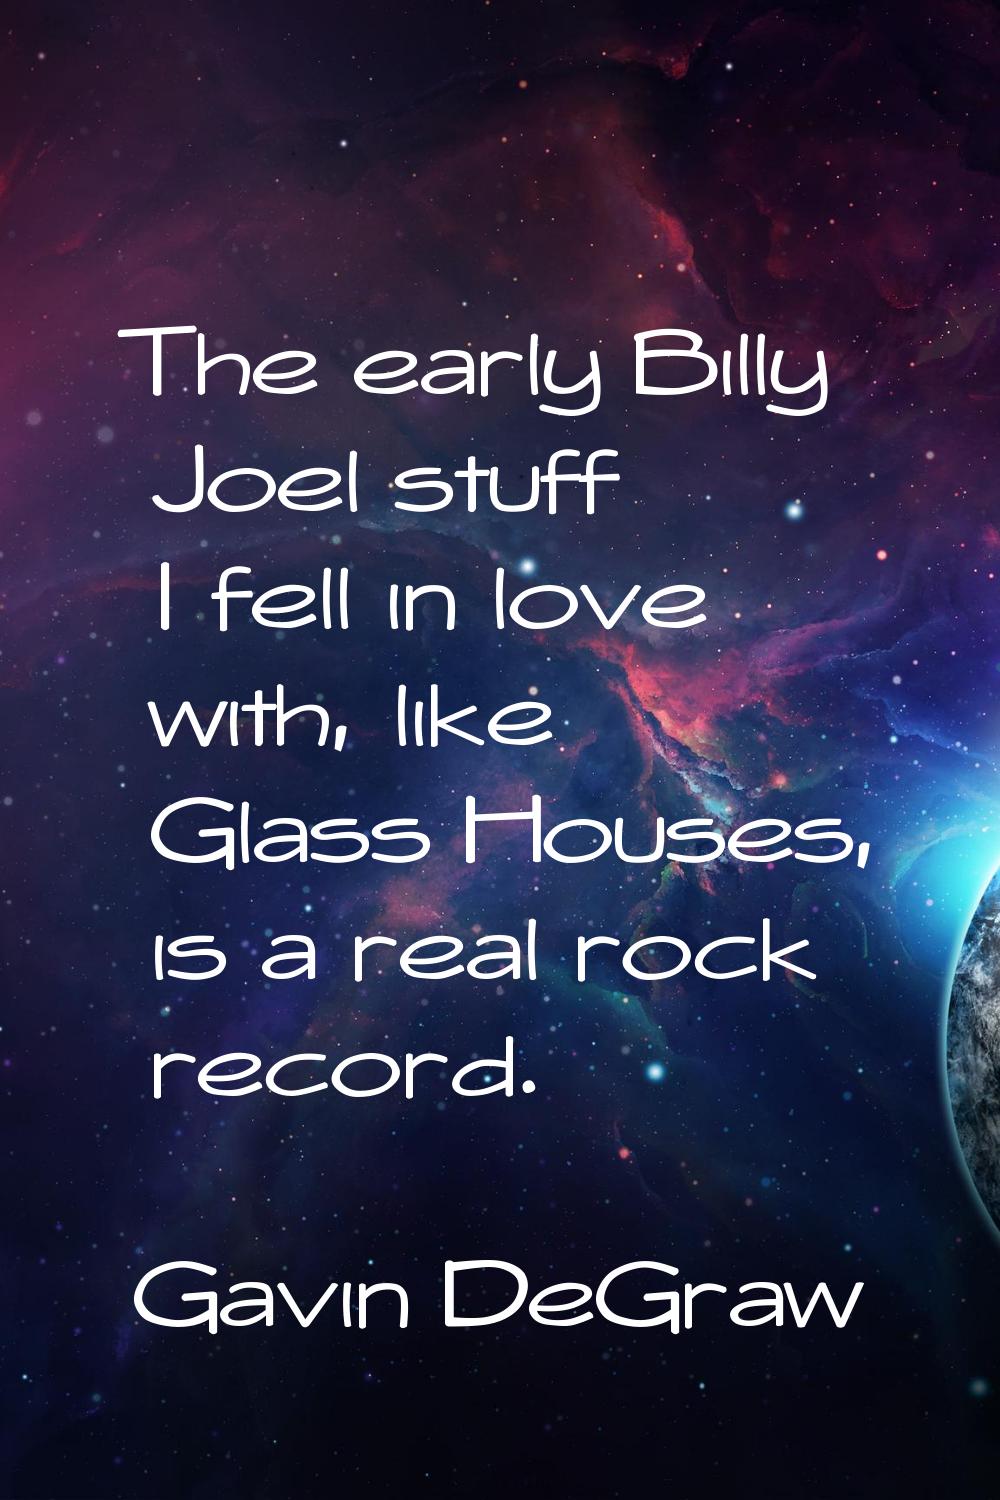 The early Billy Joel stuff I fell in love with, like Glass Houses, is a real rock record.